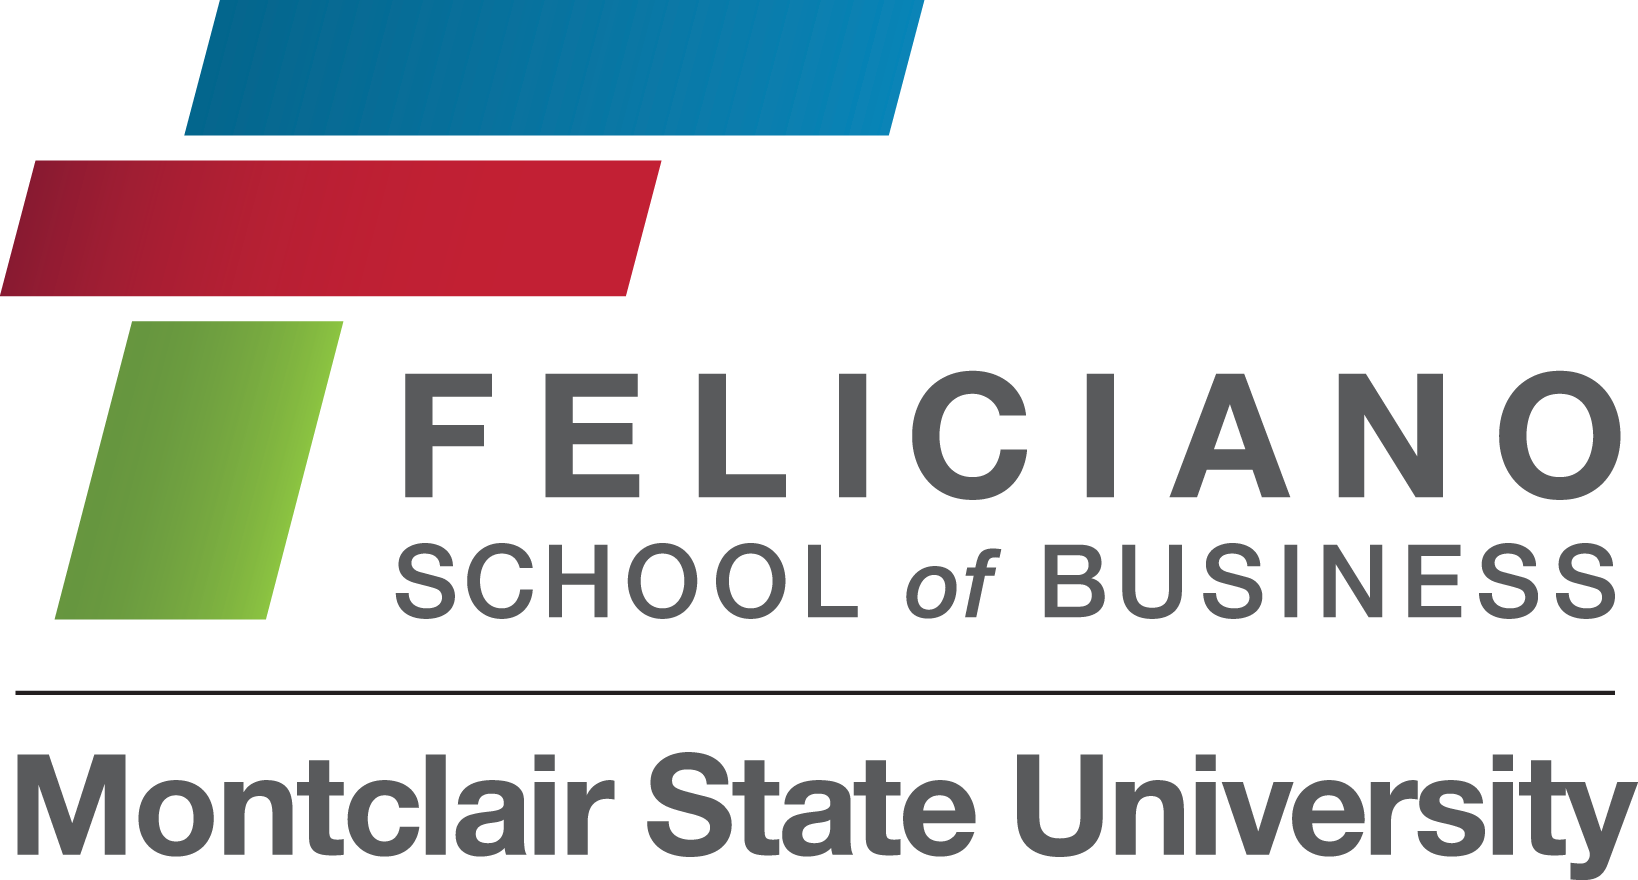 Feliciano School Of Business At Montclair State University - Feliciano School Of Business (1638x880)